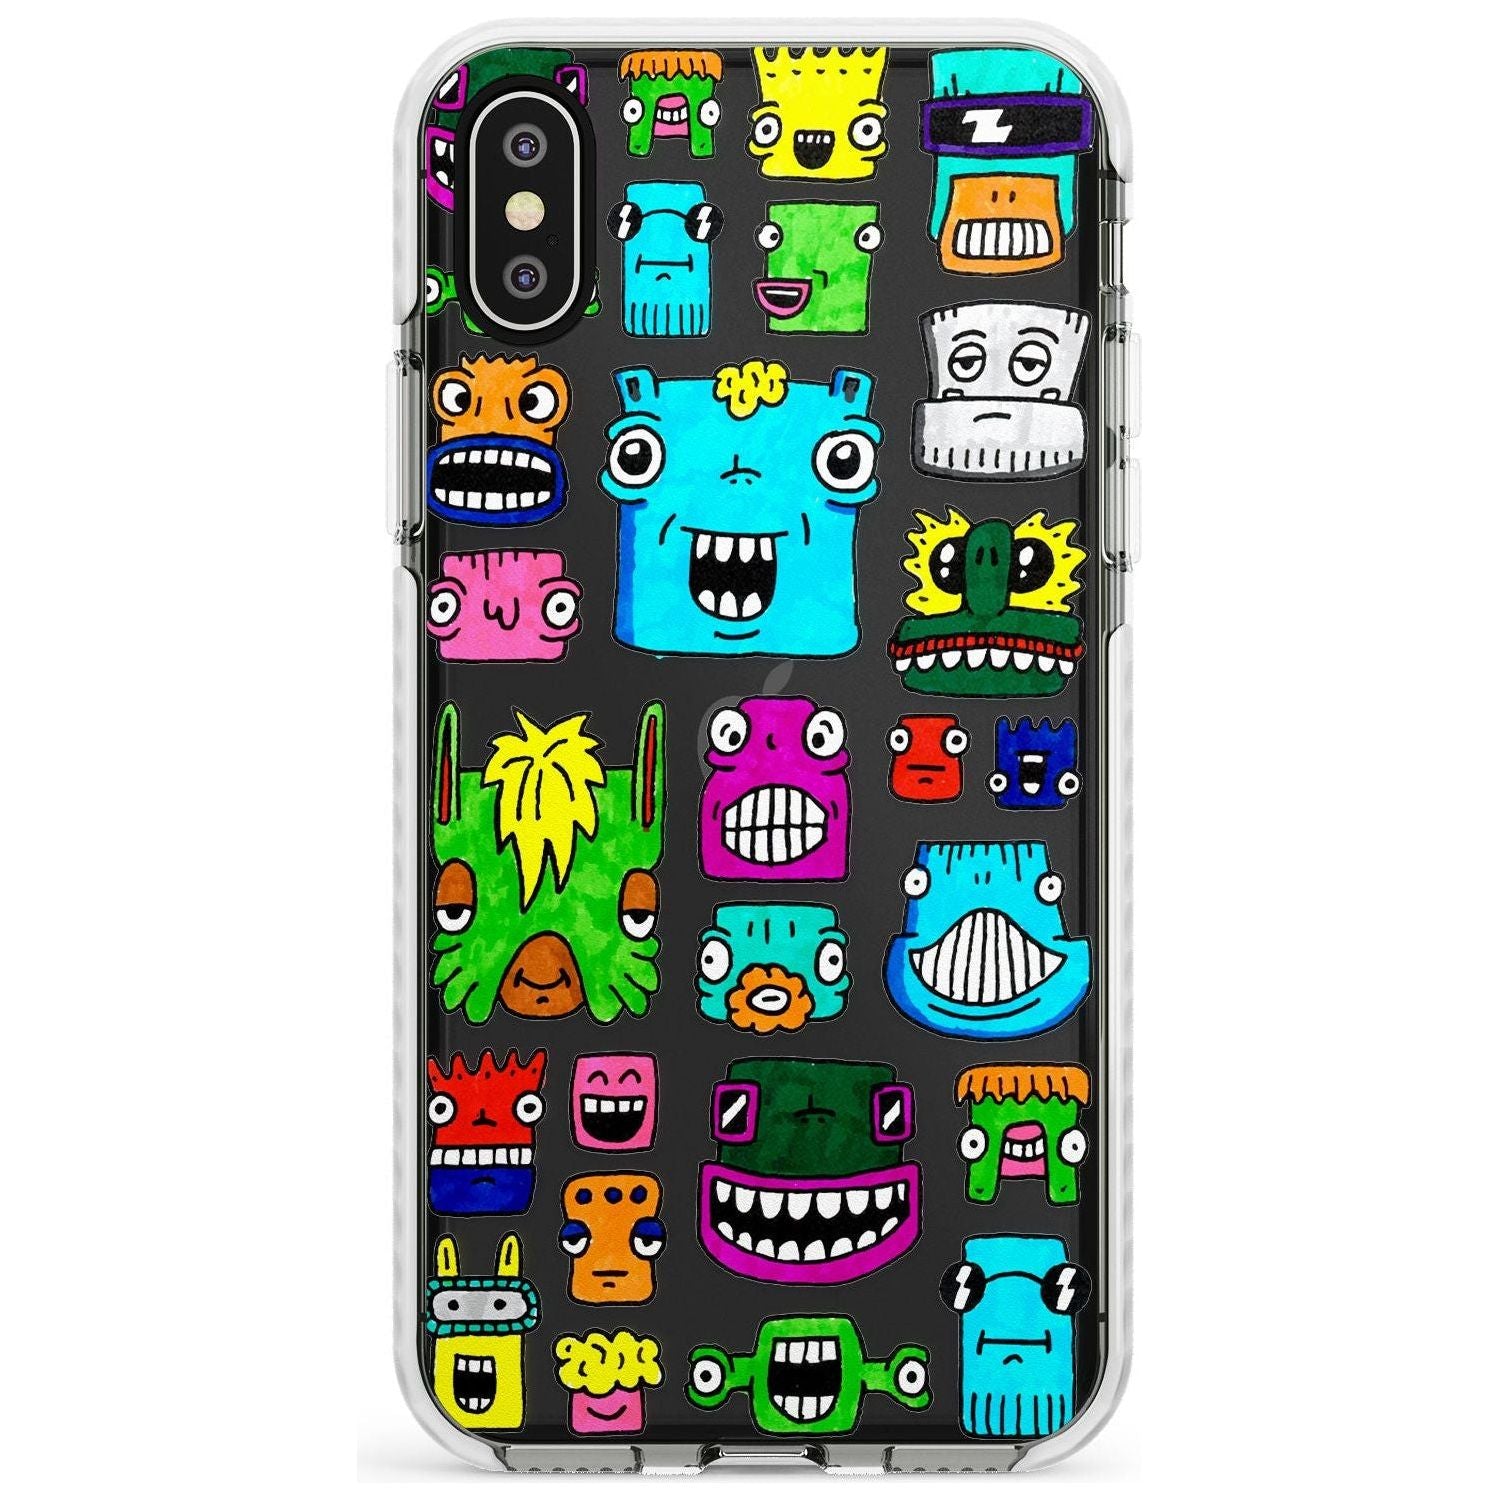 Burst Heads Colour Impact Phone Case for iPhone X XS Max XR